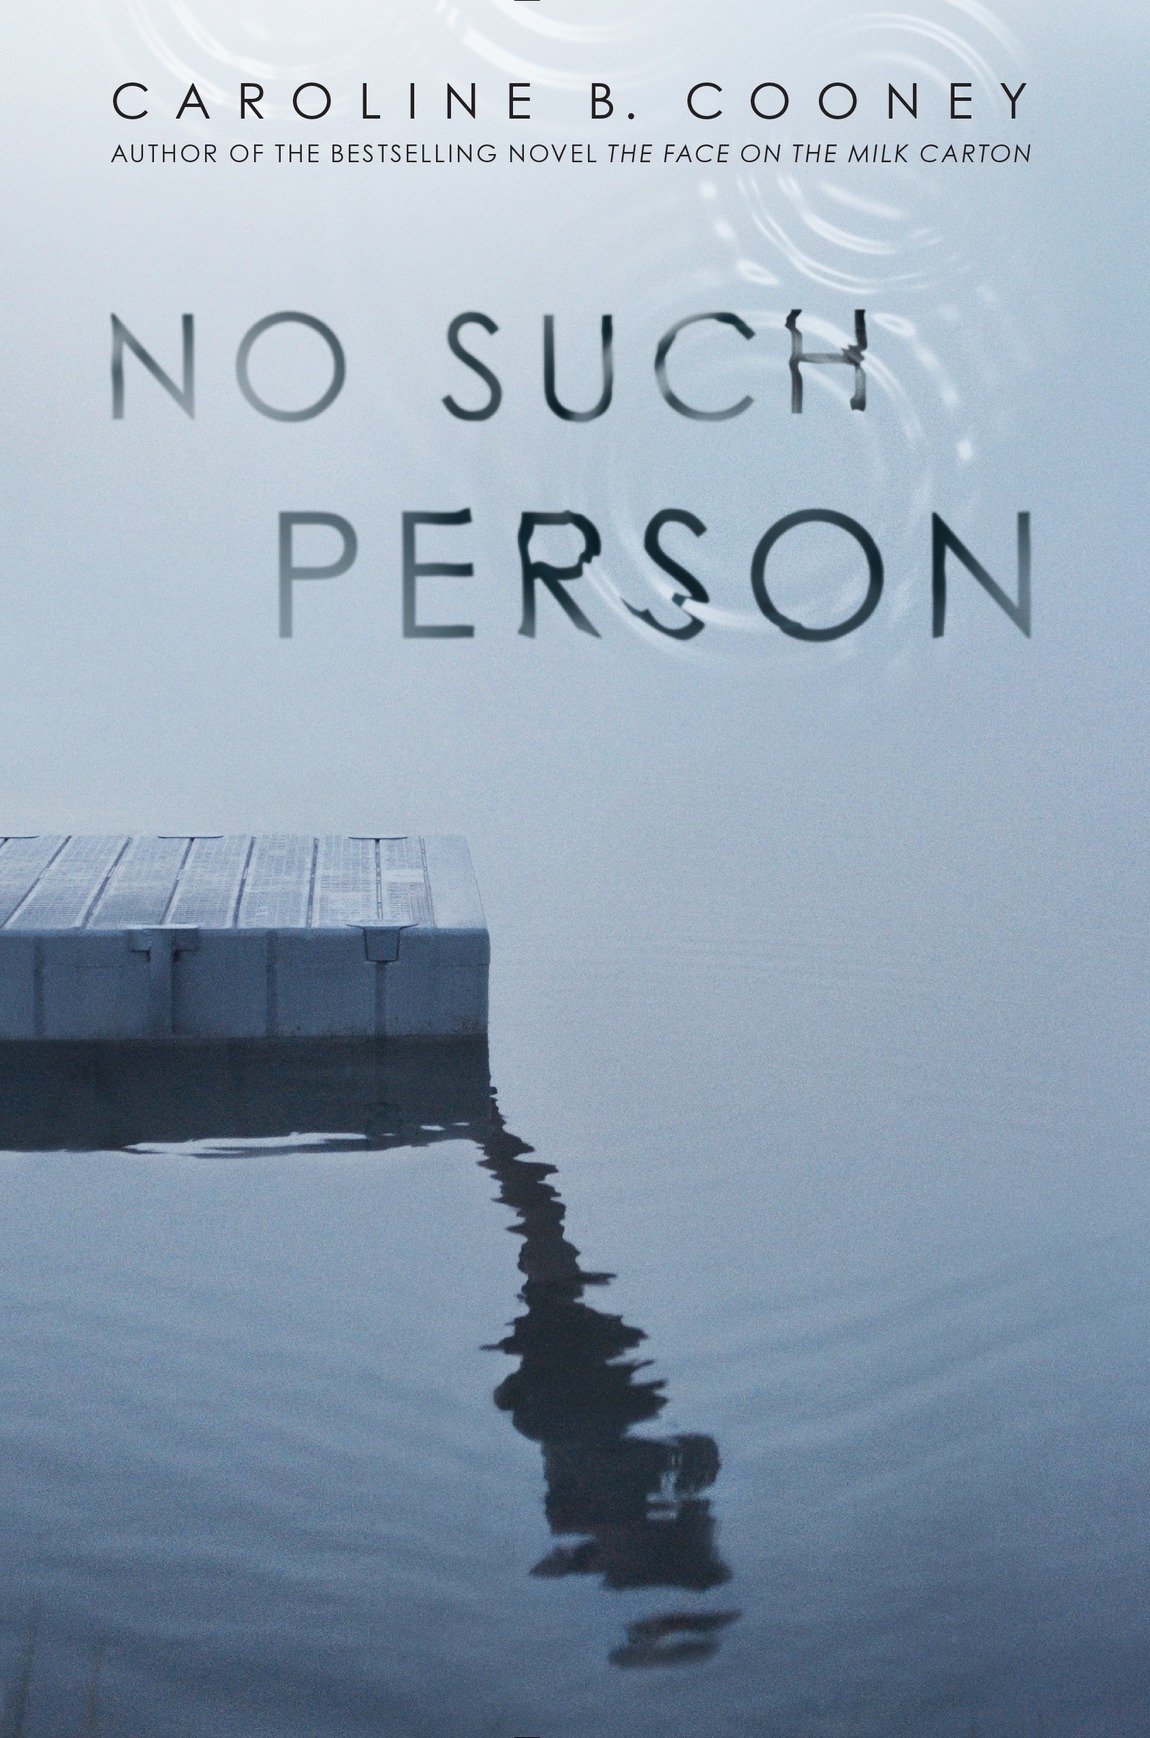 No Such Person (2015) by Caroline B. Cooney